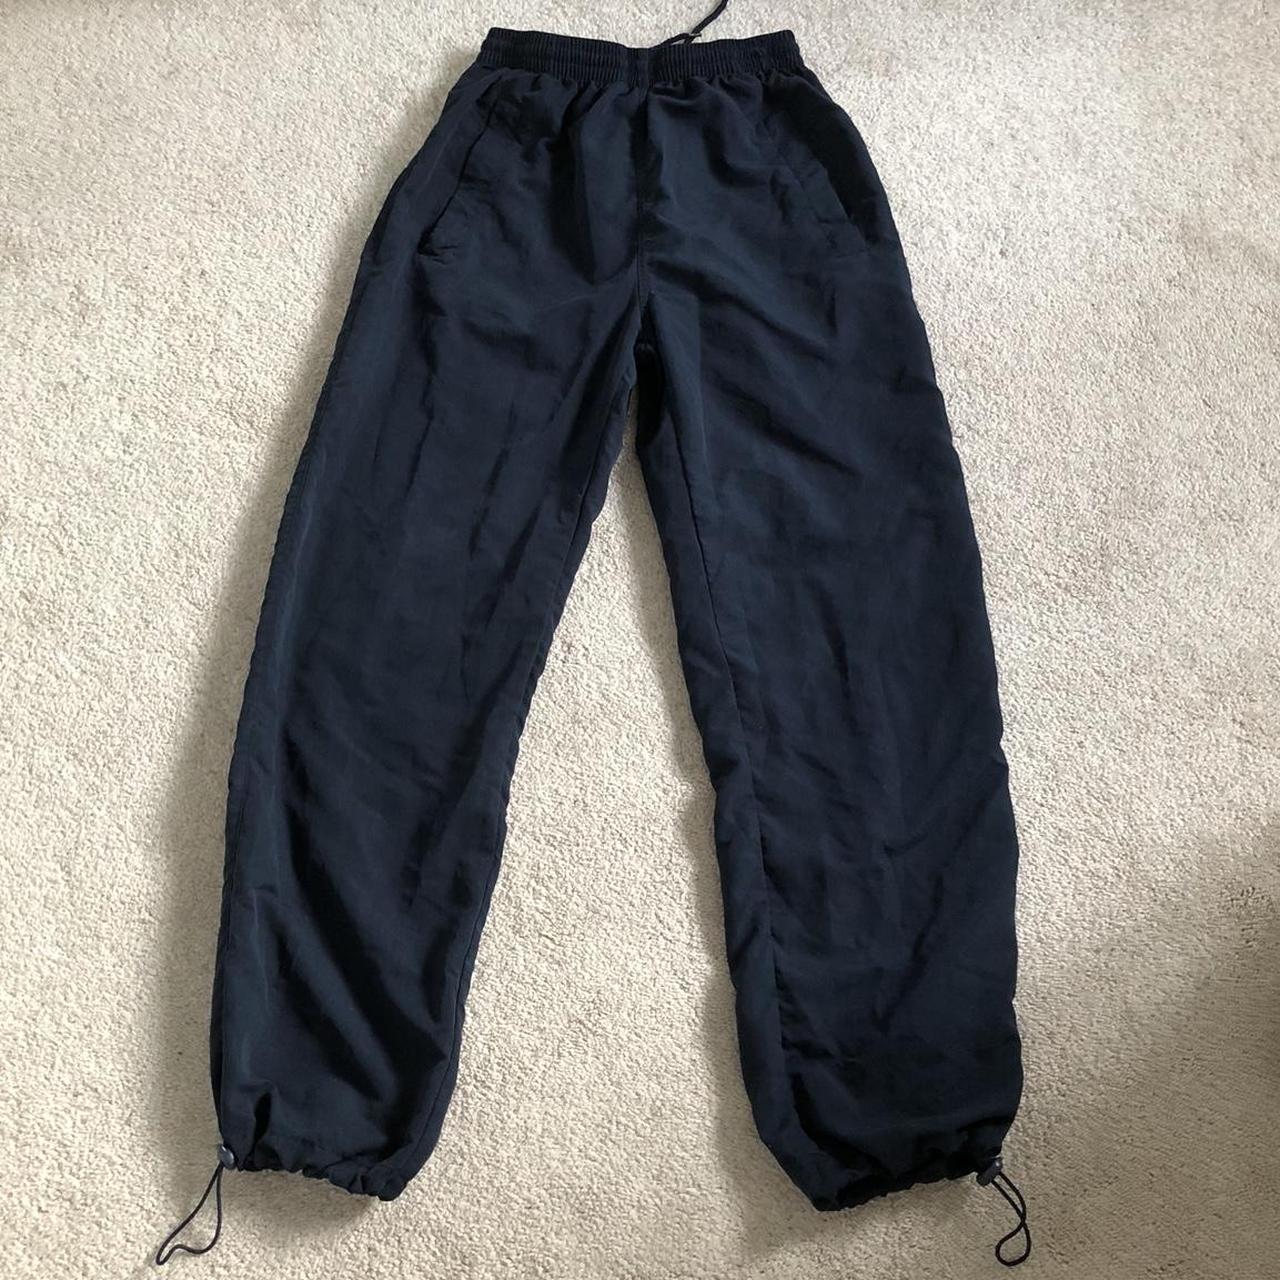 Navy tracksuit bottoms/toggle cargo trousers in an... - Depop